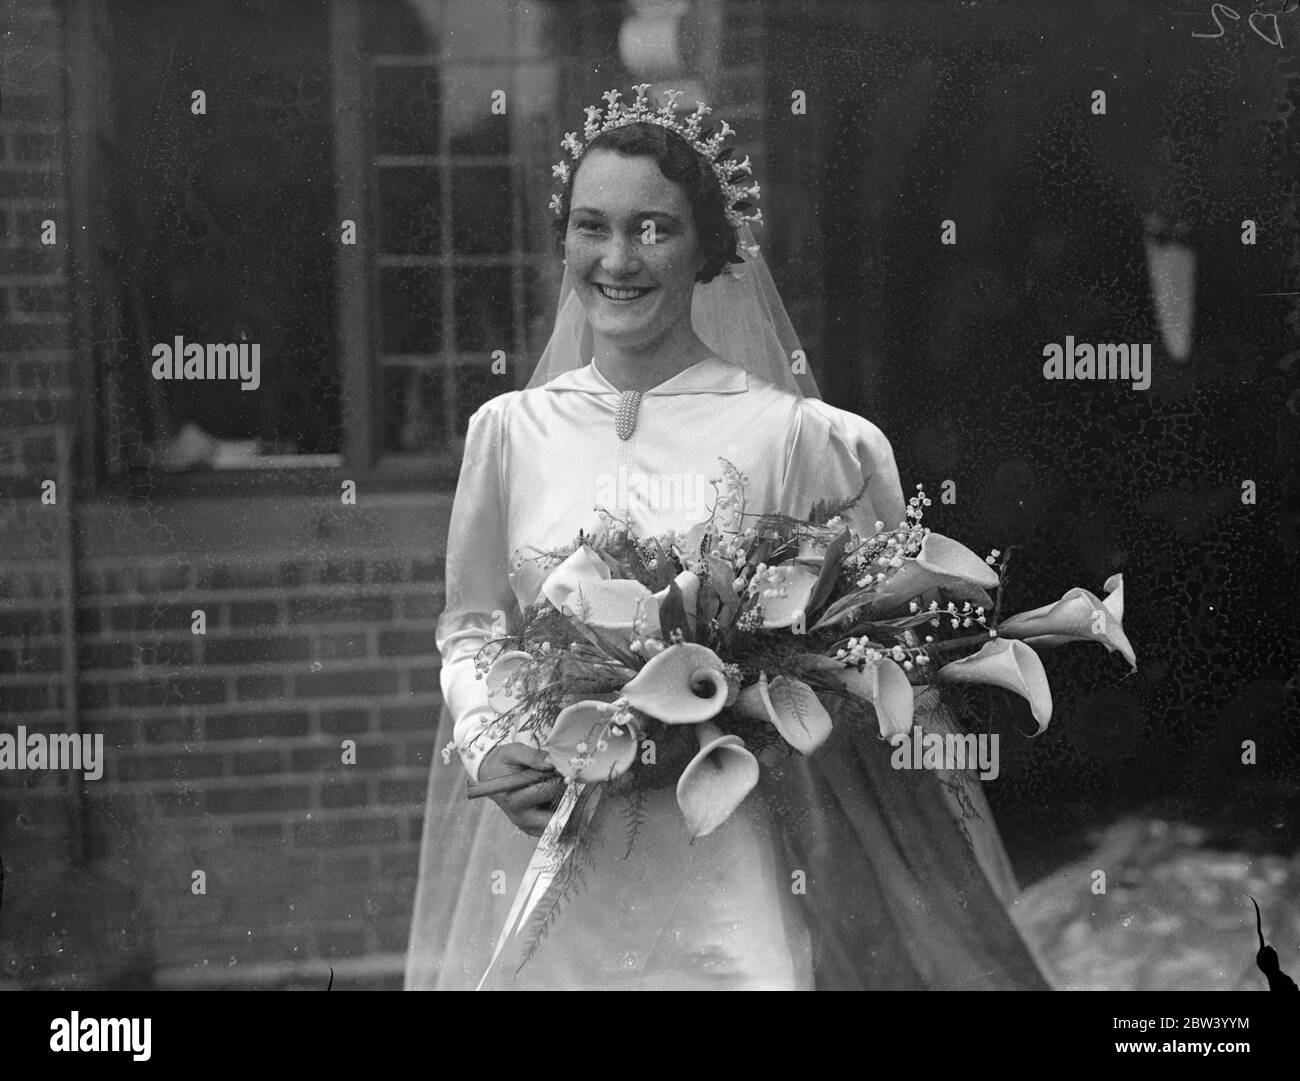 Chief Scout daughter has village wedding . Miss Betty St Claire Baden Powell , youngest daughter of Lord Baden Powell , was married in the old village church of Bently , Hampshire , to Mr Gervas Charles Roberts Clay , district officer in the Administration service of Northern Rhodesia . Mr Clay the elder son of Mr and Mrs Gerard Arden Clay of Albury , Surrey . The bride is 19 years of age . Bridegroom first met his bride last May in the liner in which she was returning to England with her parents and sister . 16 members of the Westminster Abbey choir who belonged to the Boy Scout movement sang Stock Photo